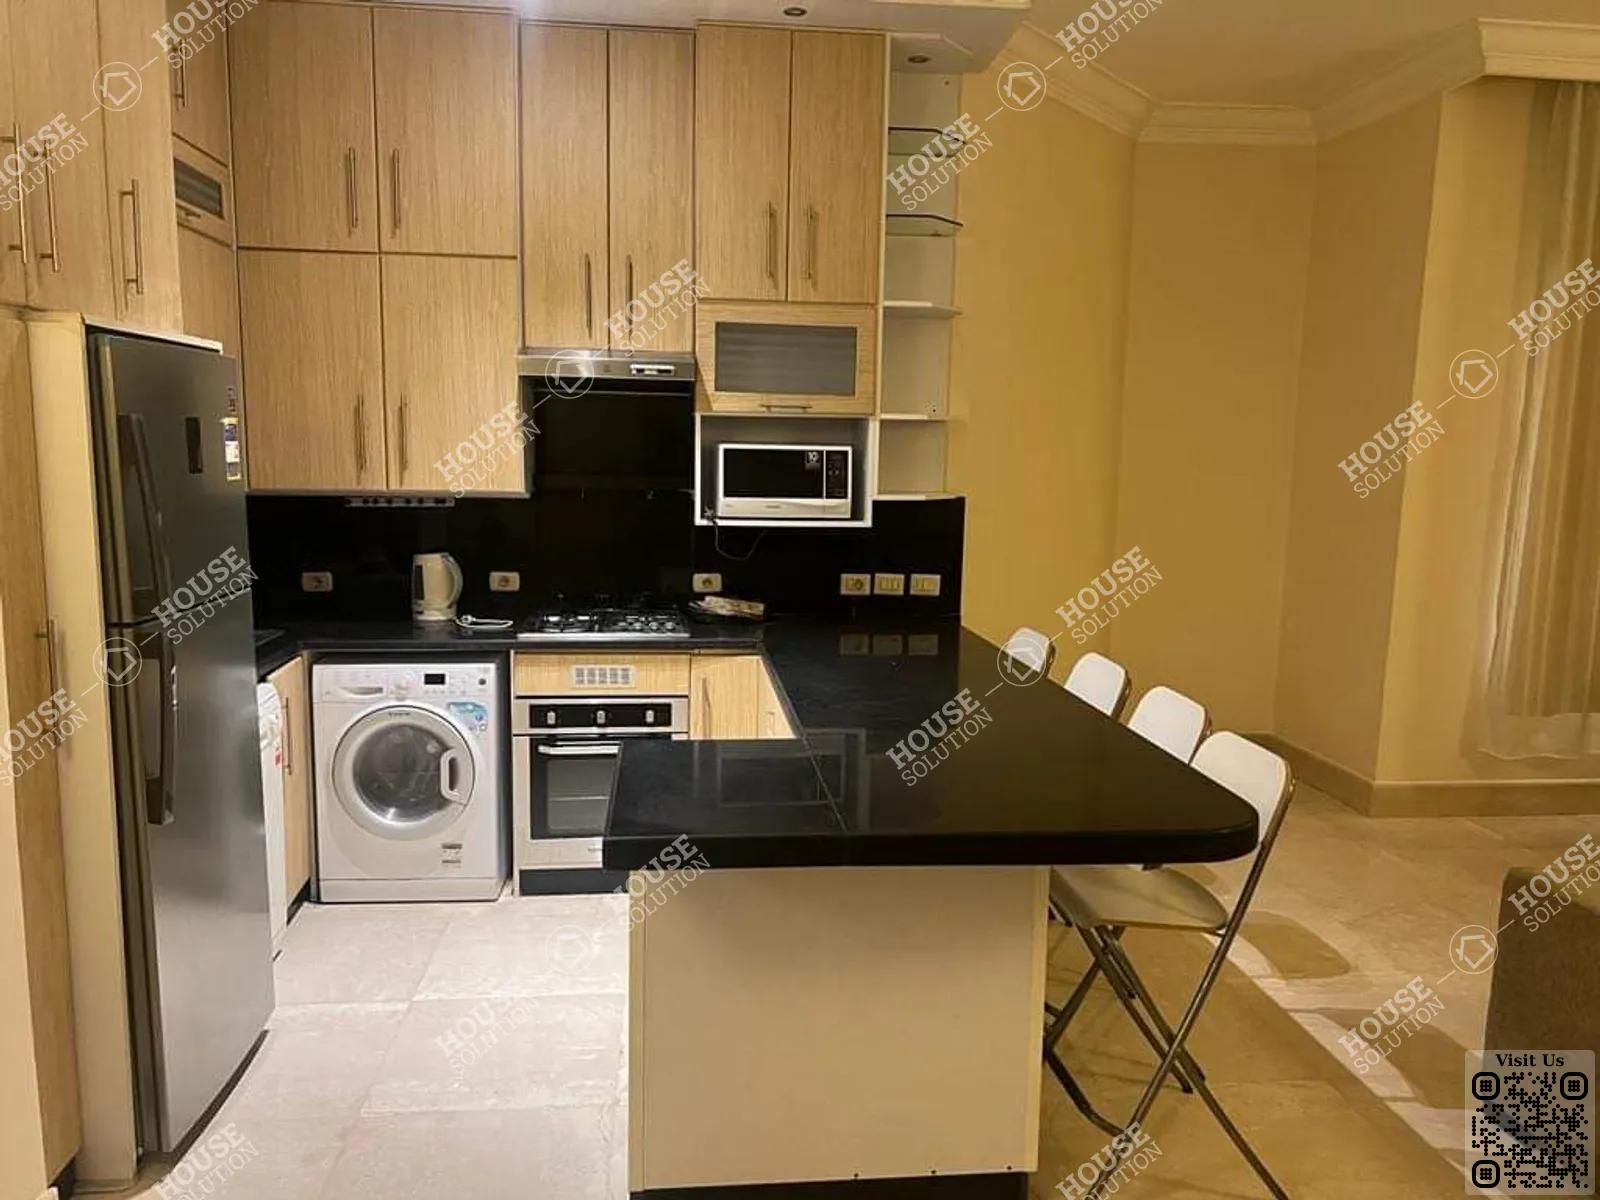 KITCHEN  @ Apartments For Rent In Maadi Maadi Sarayat Area: 150 m² consists of 2 Bedrooms 2 Bathrooms Modern furnished 5 stars #5701-1